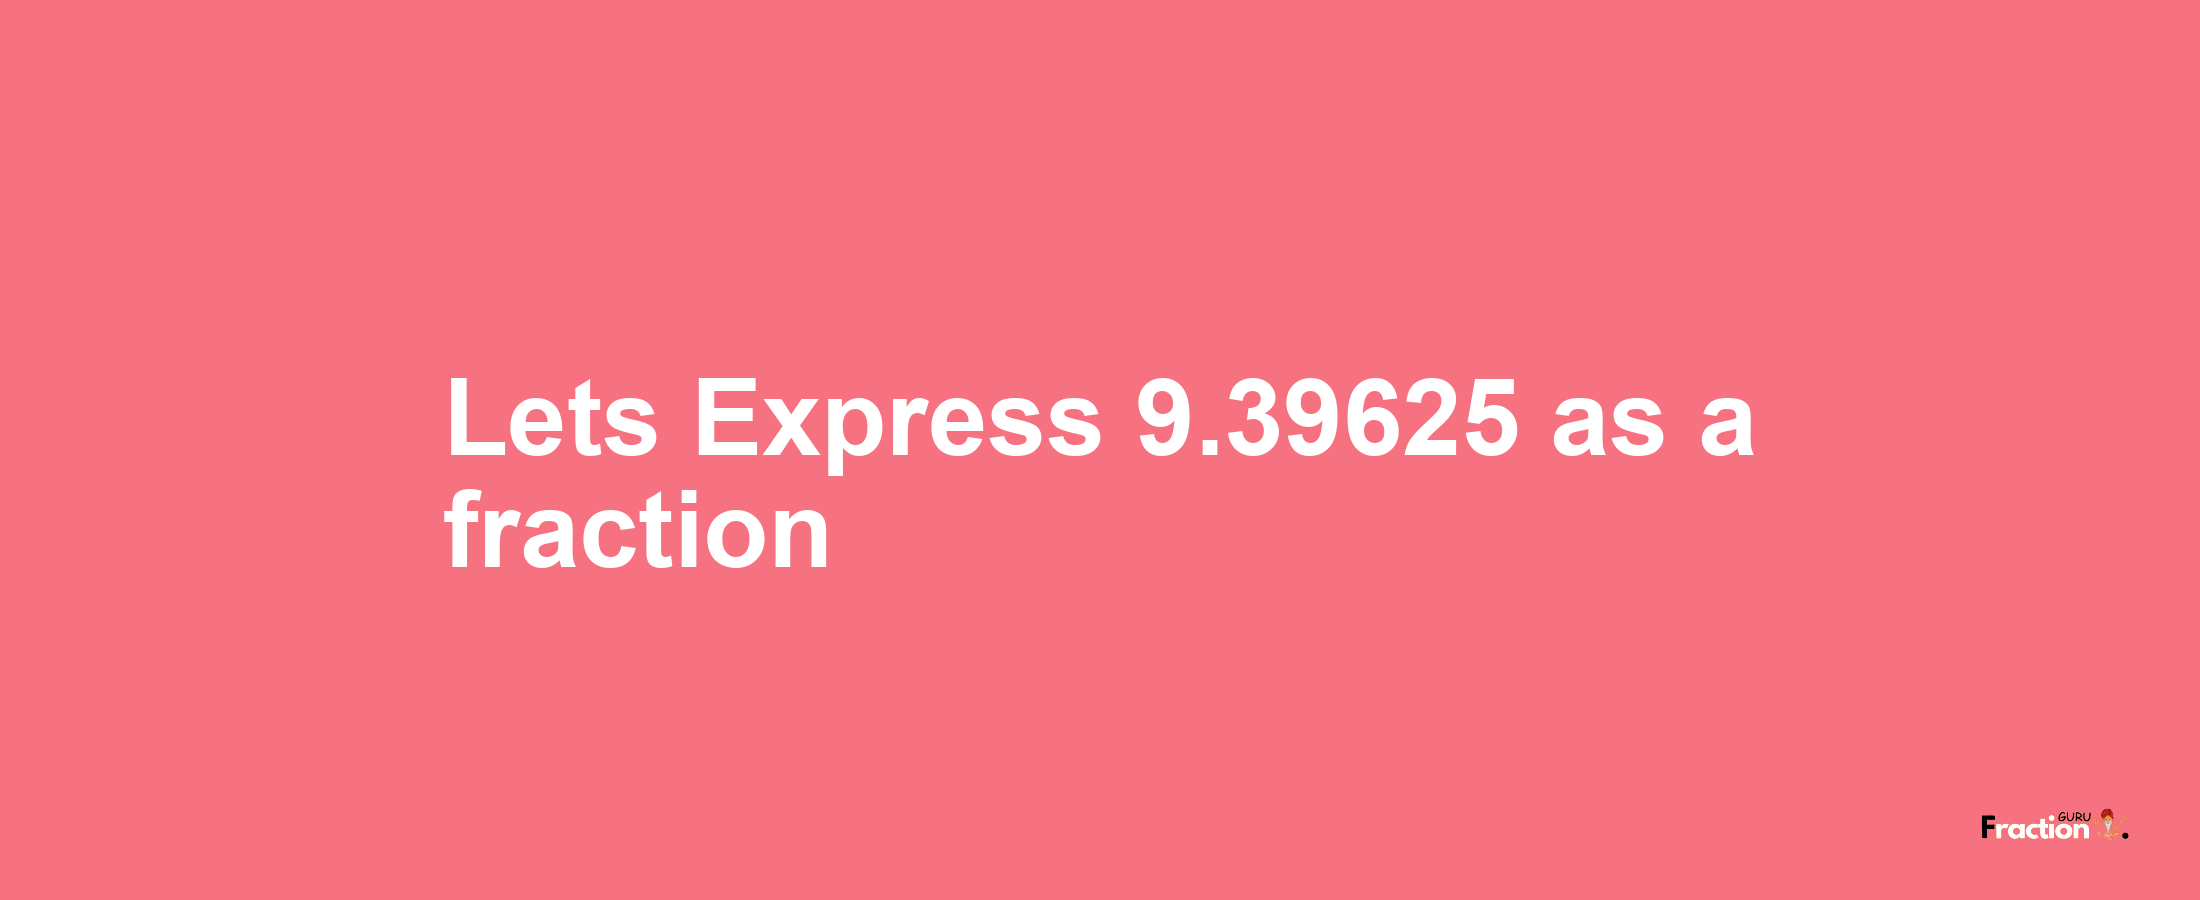 Lets Express 9.39625 as afraction